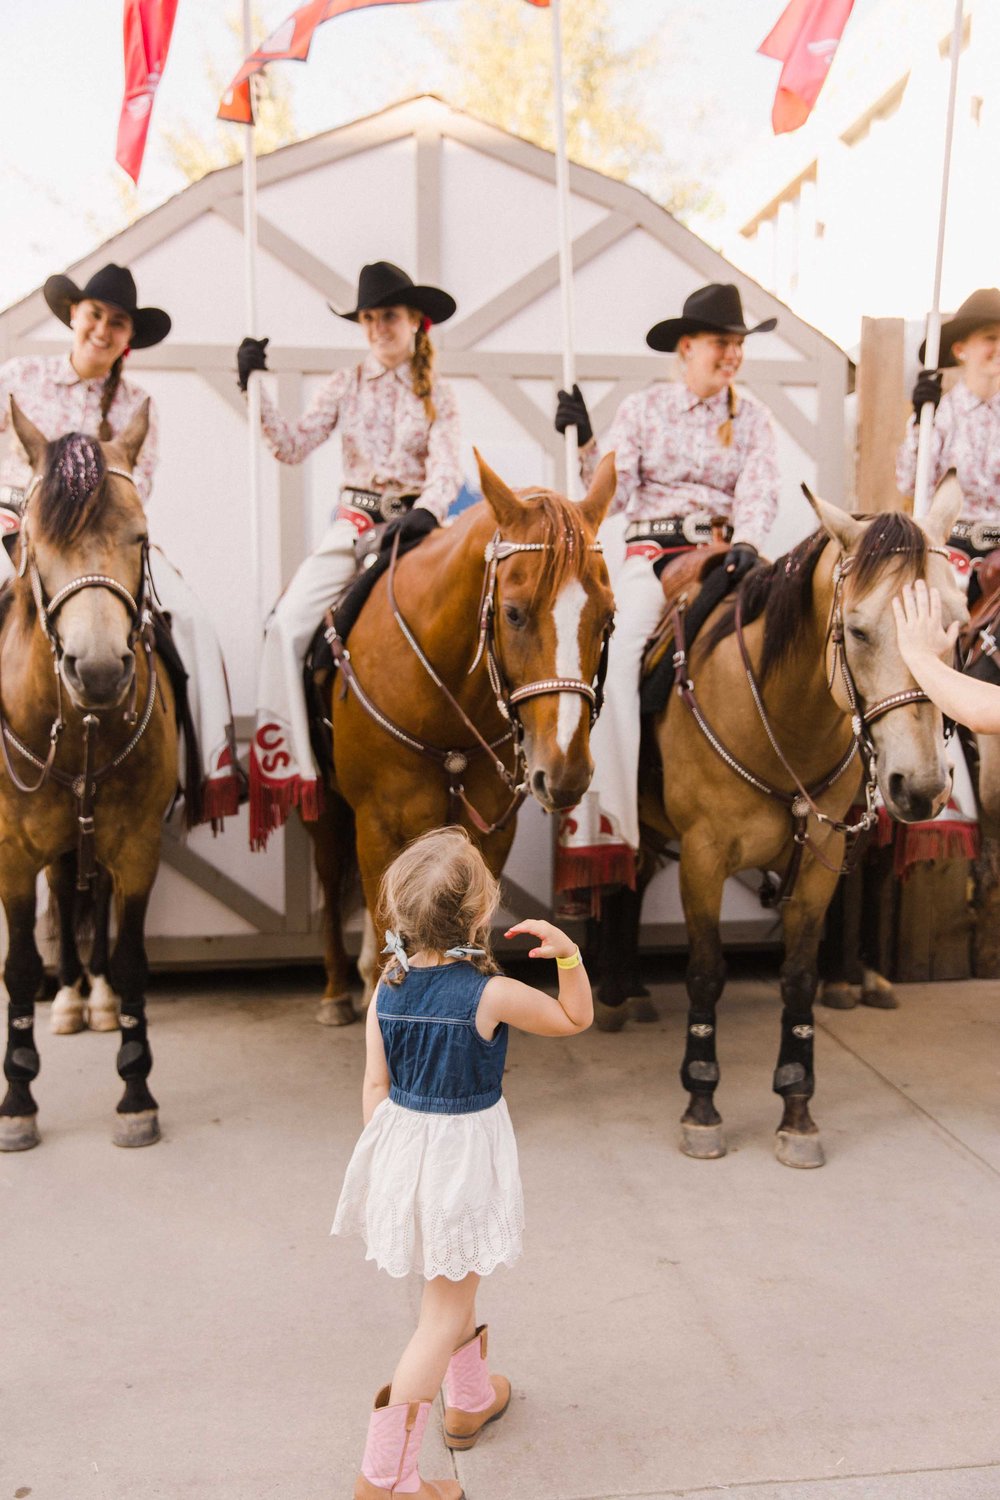 Showriders Calgary Stampede 10 Best Place to Take Instagrammable Photos